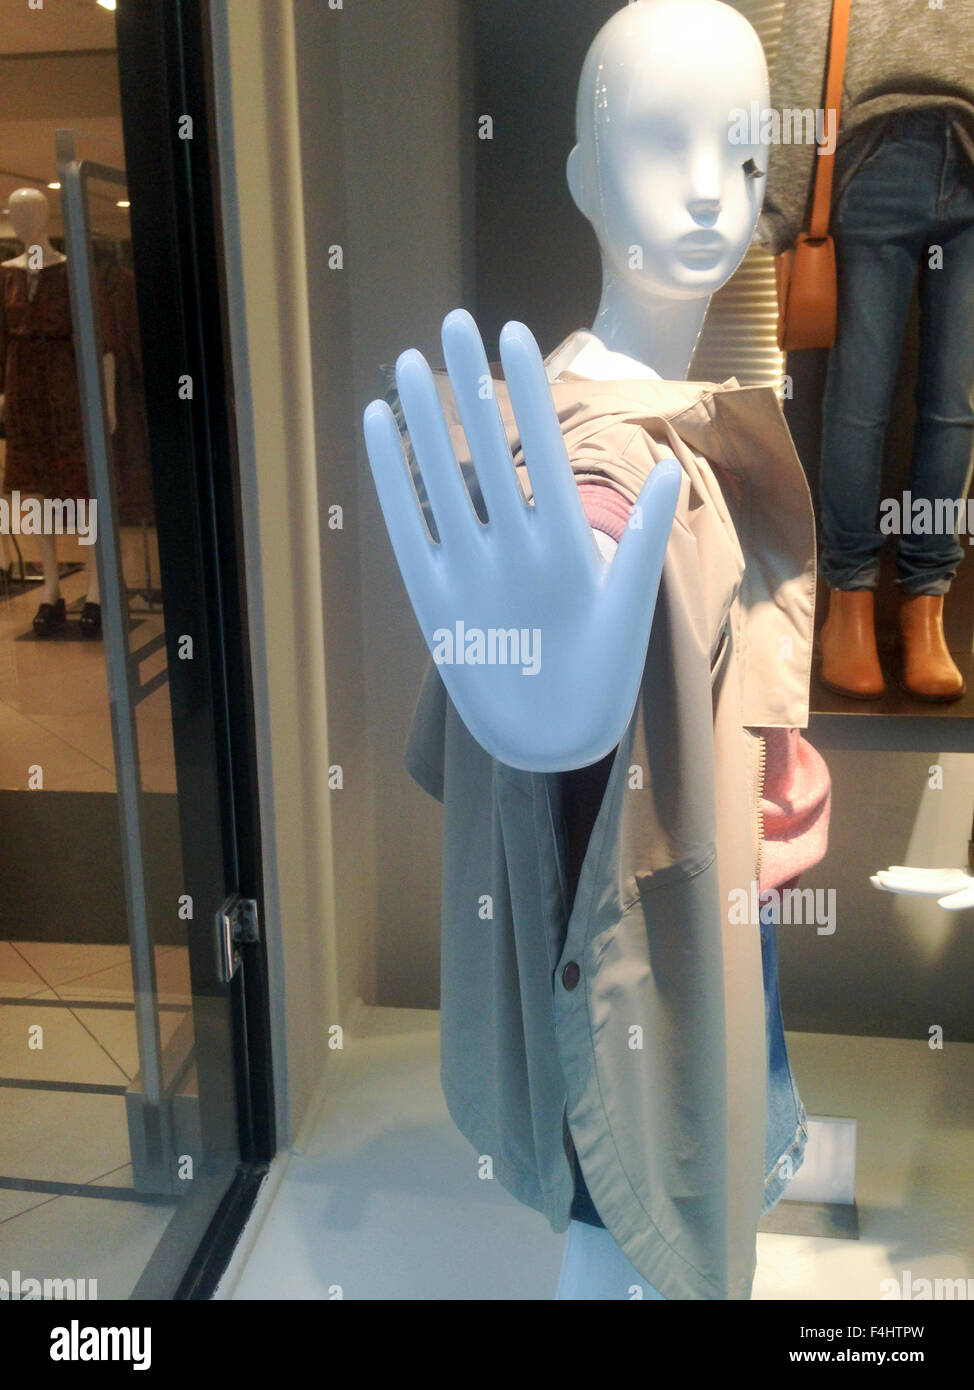 One dressed female mannequin in clothing store with stop hand symbol Stock Photo